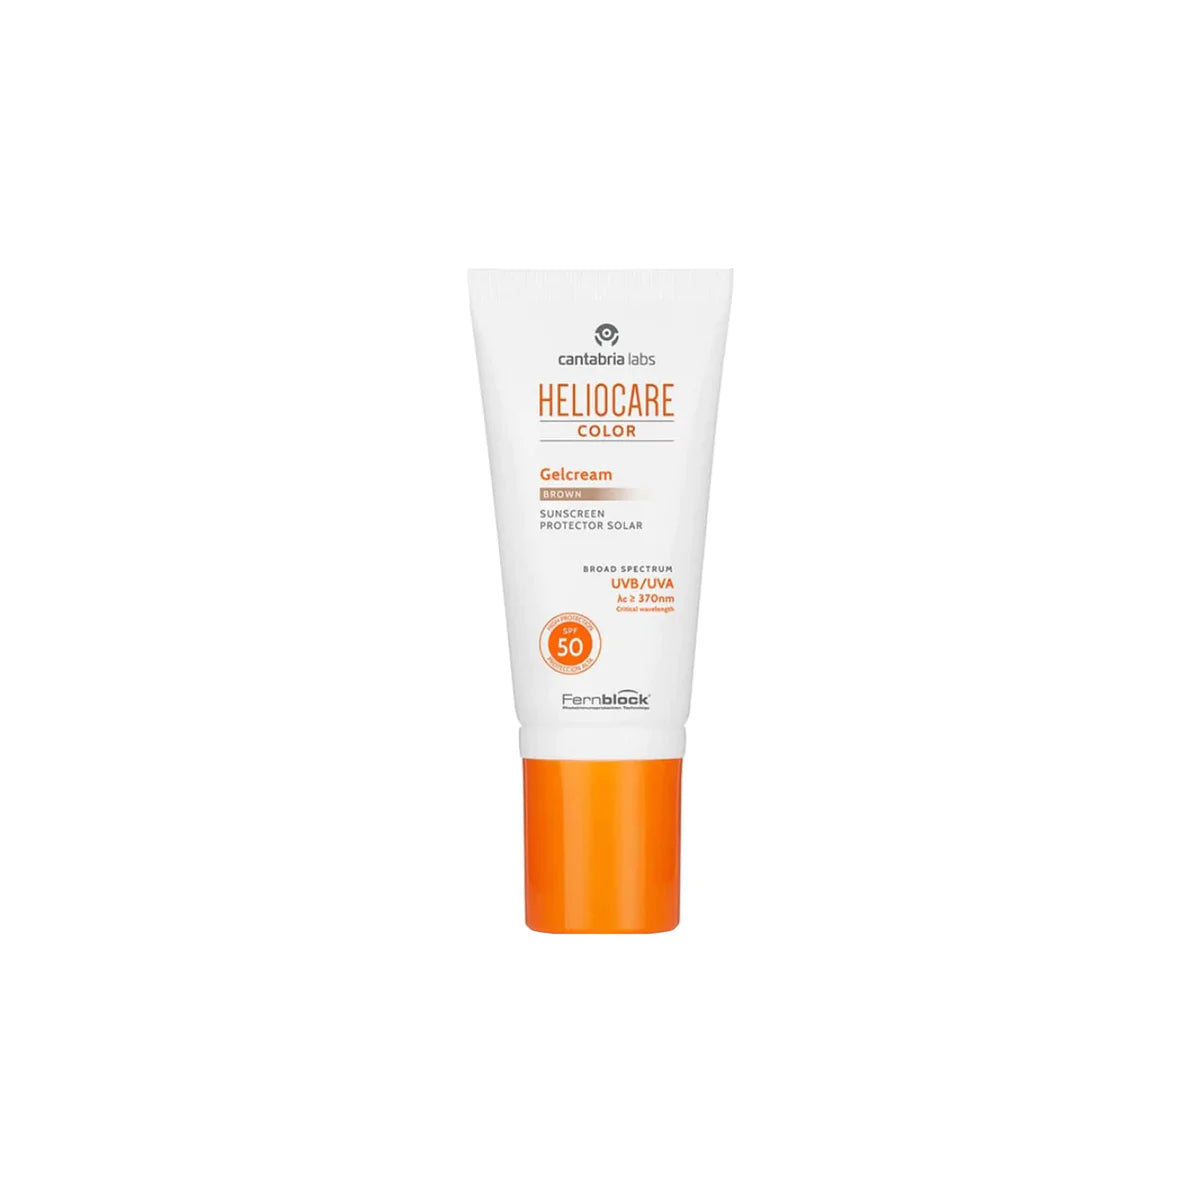 Heliocare Gelcream SPF 50 Brown